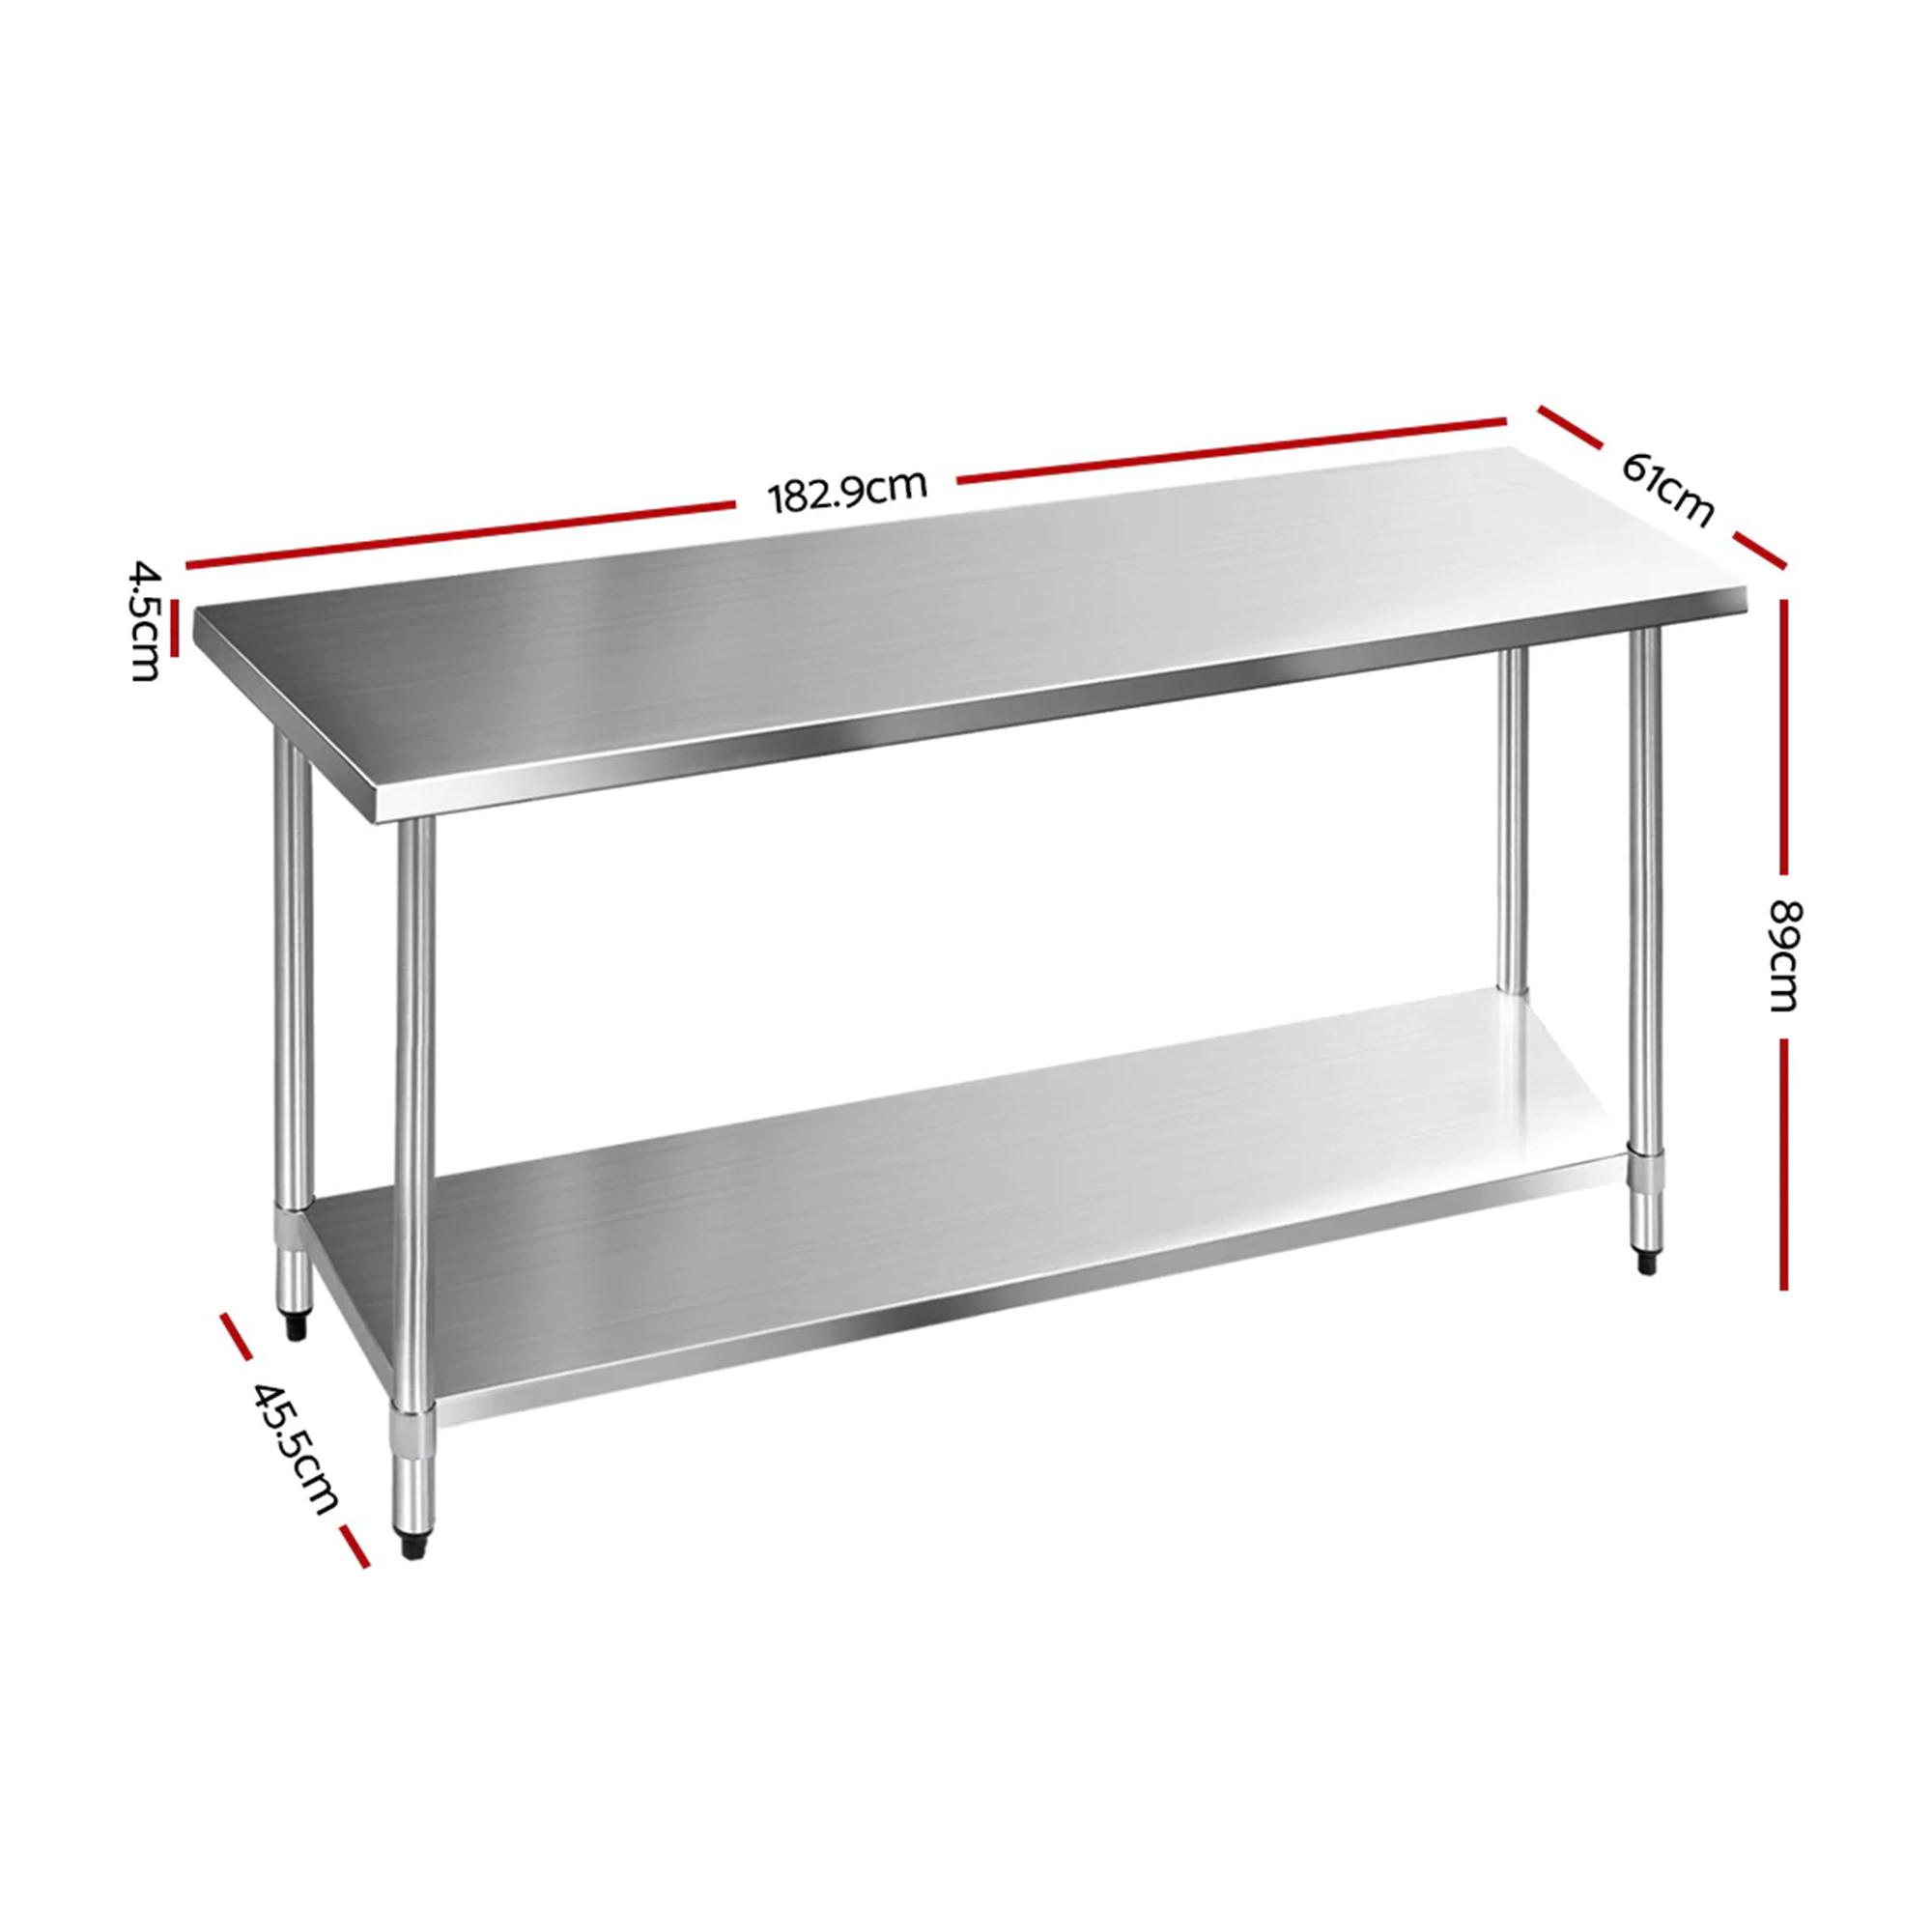 Cefito 430 Stainless Steel Kitchen Bench 182.9x61cm Image 3